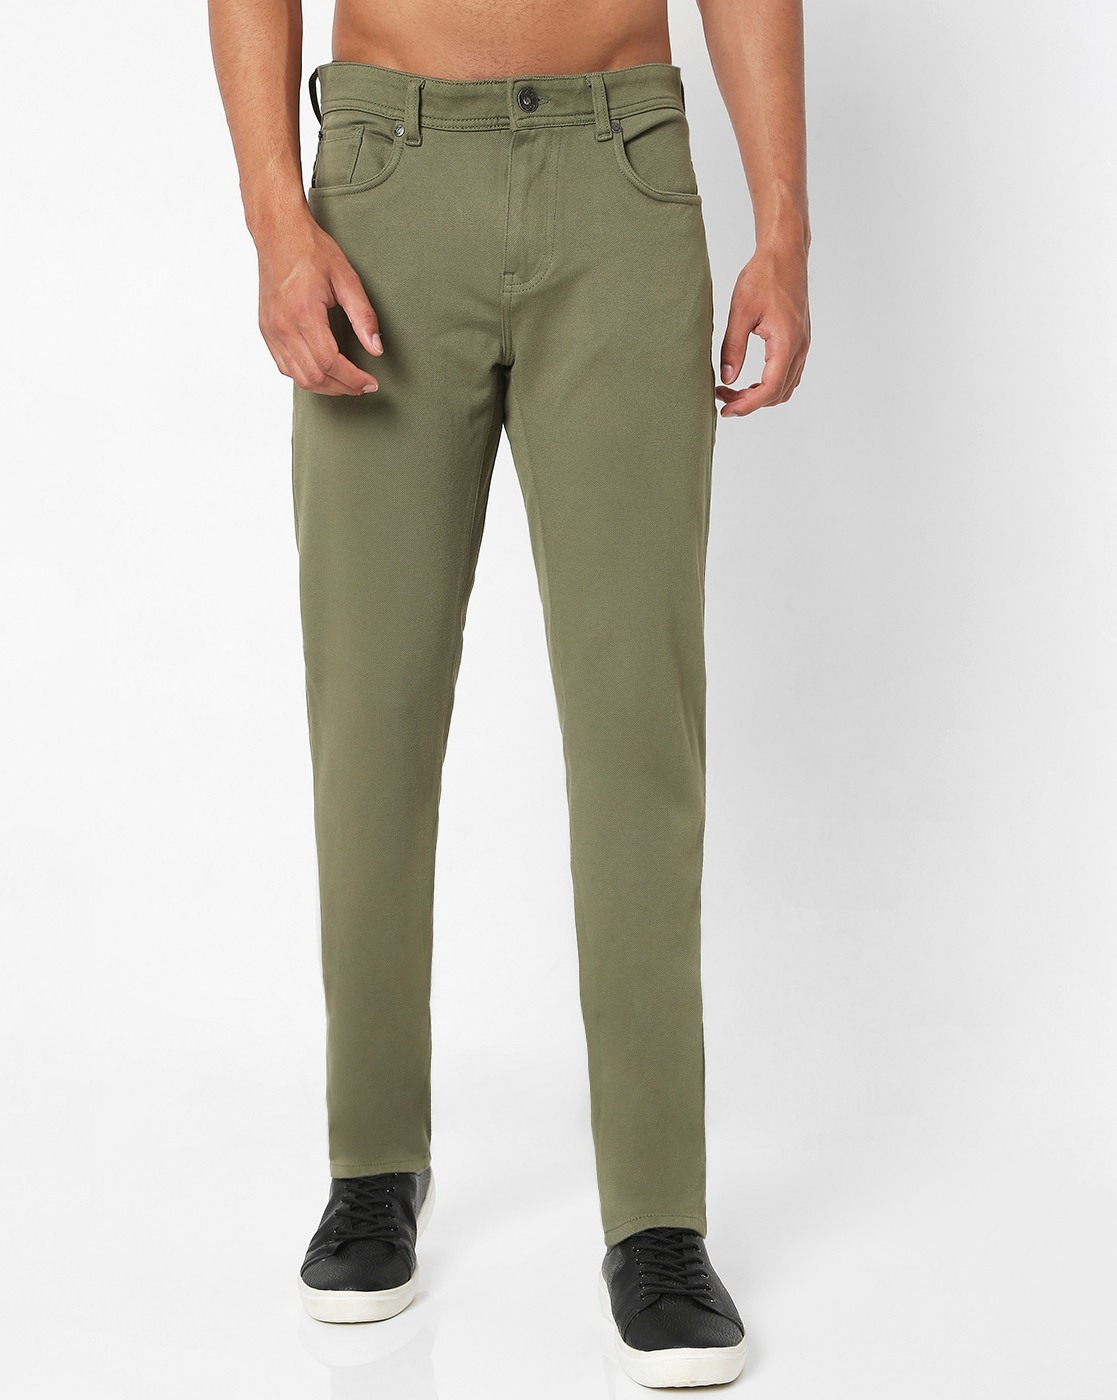 34 Heritage Men's Charisma Relaxed Straight Pants In British Khaki Twill